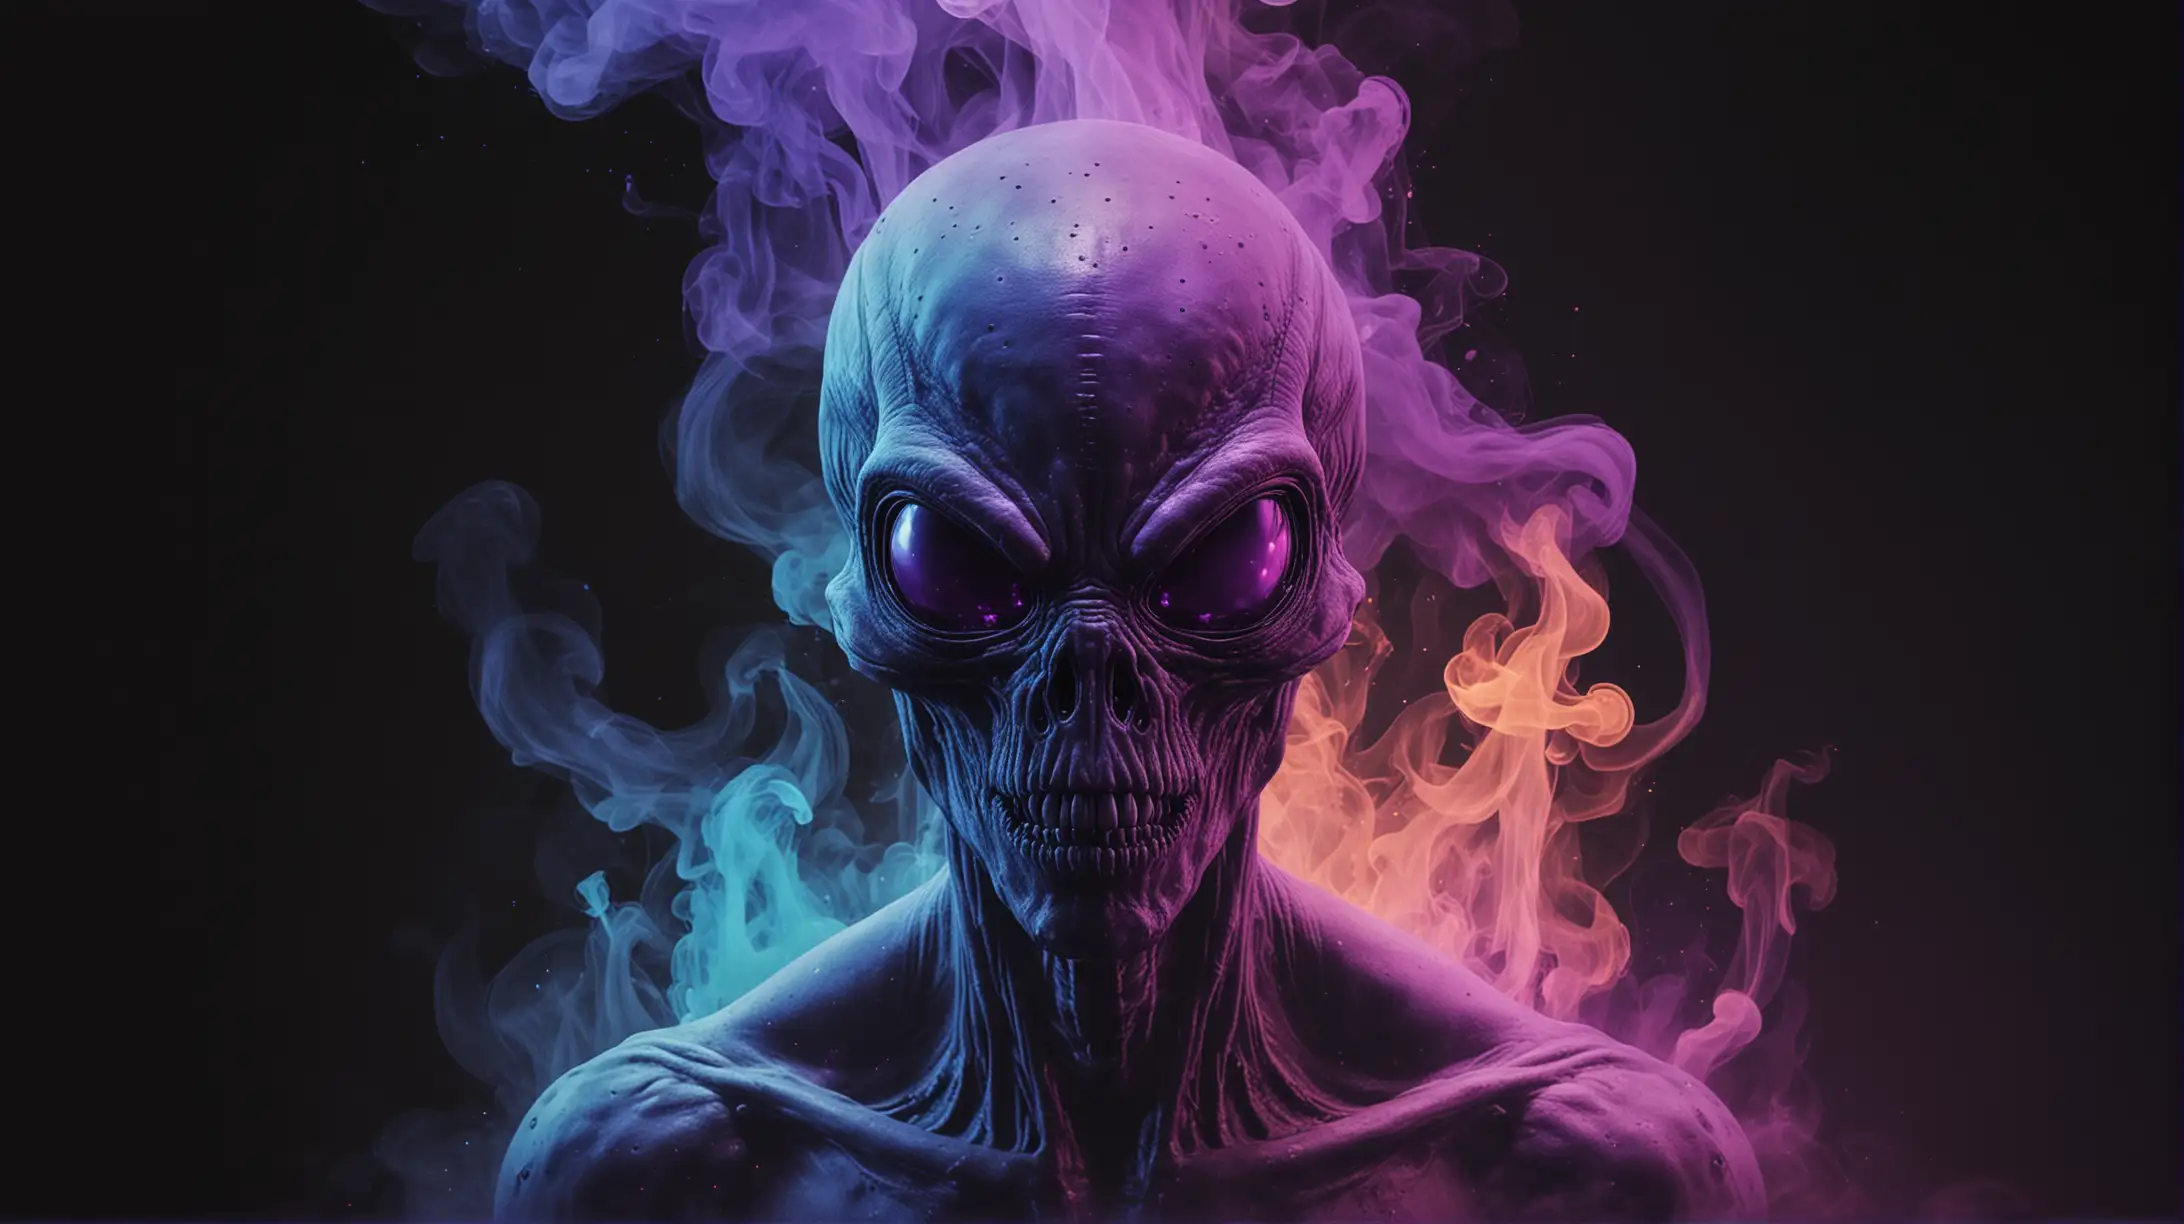 Scary Alien and Neon Smoke Mist in Double Exposure Style